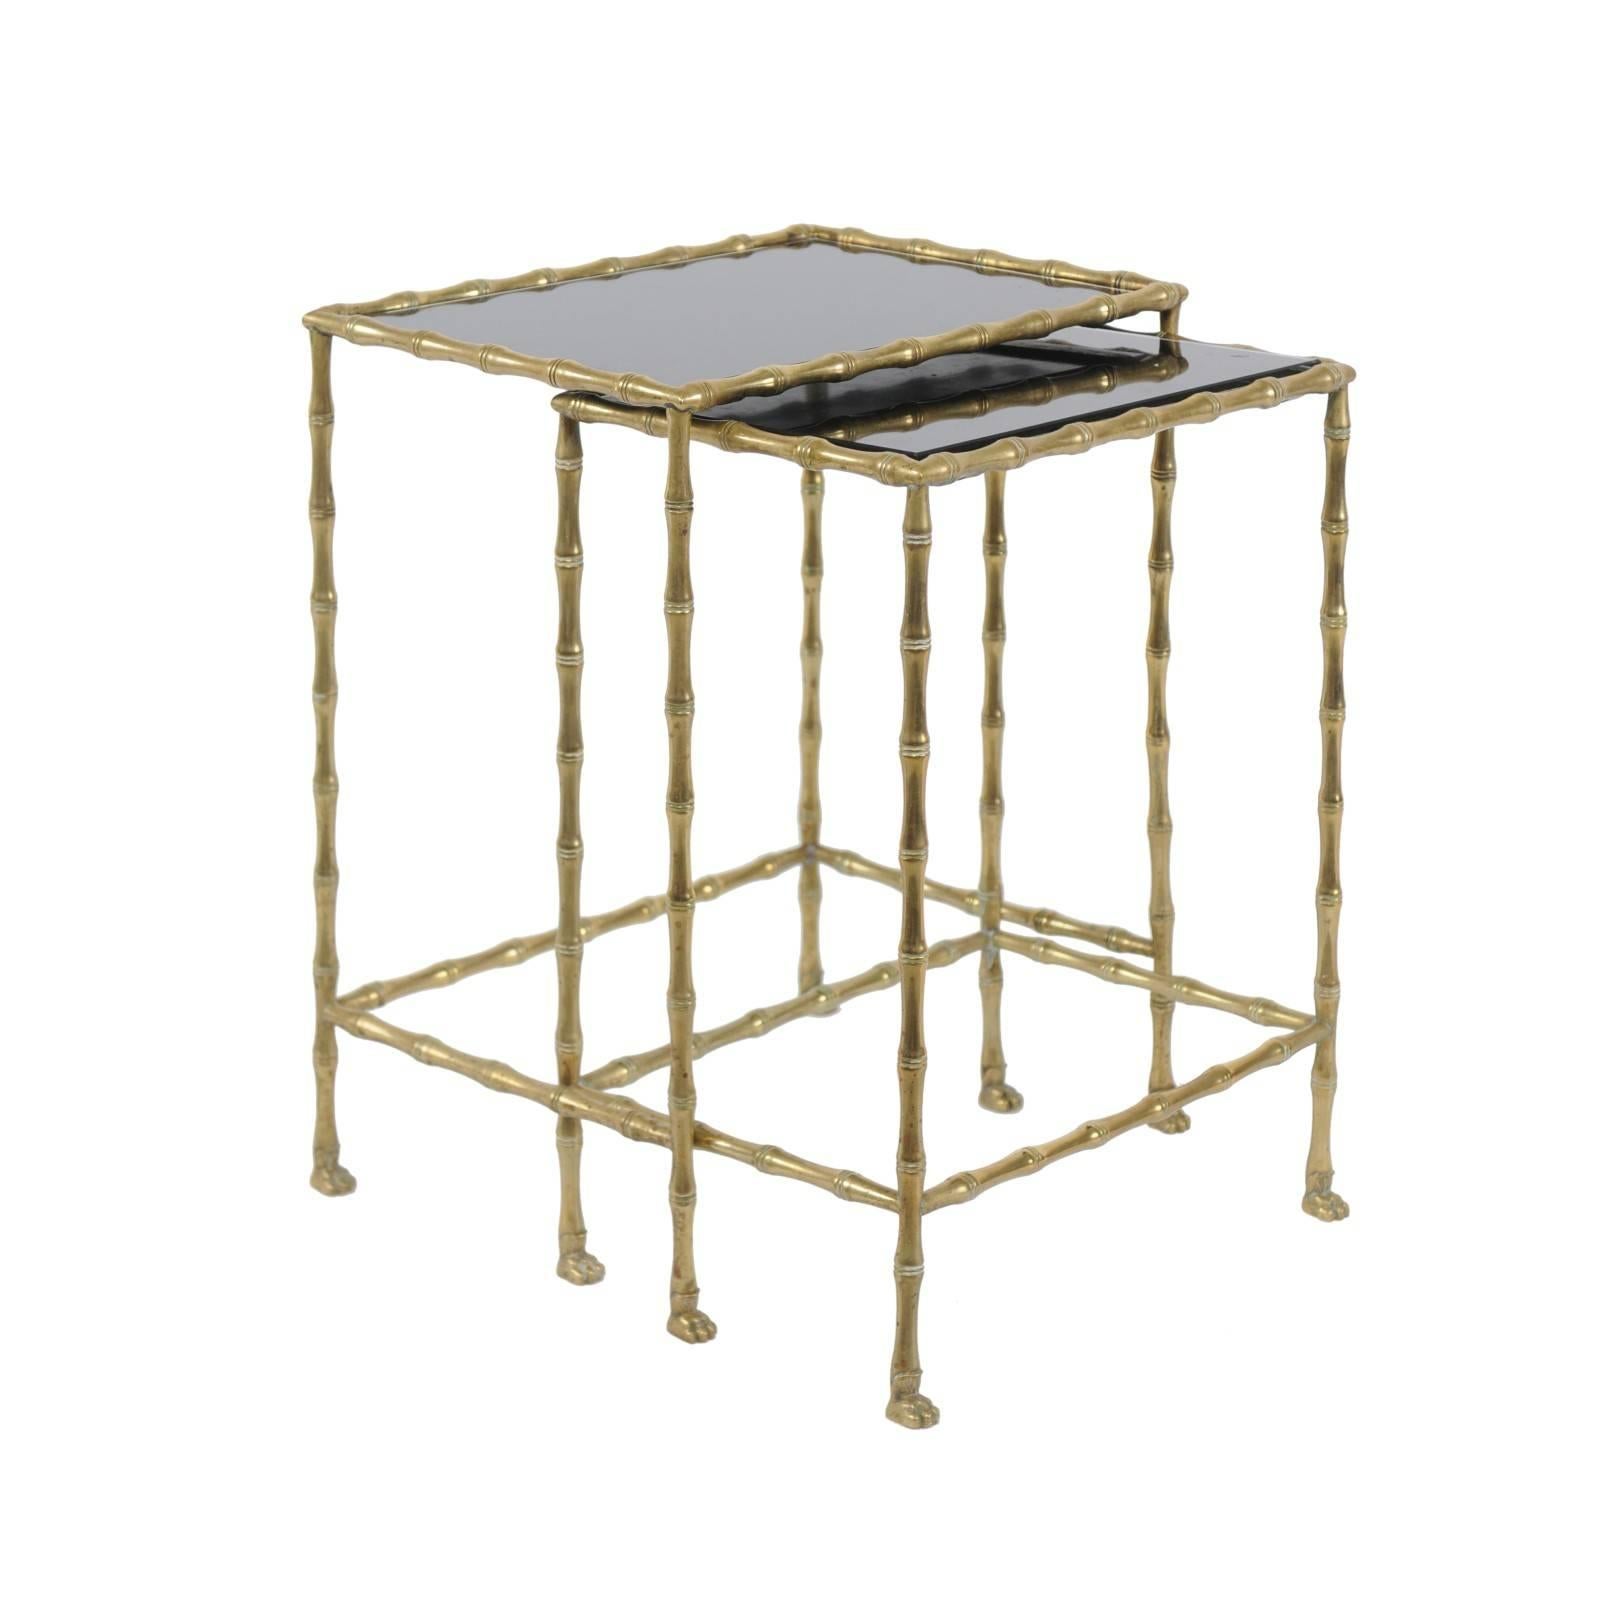 1950s Pair of Vintage French Brass and Stone Tops, Bamboo-Style Nesting Tables